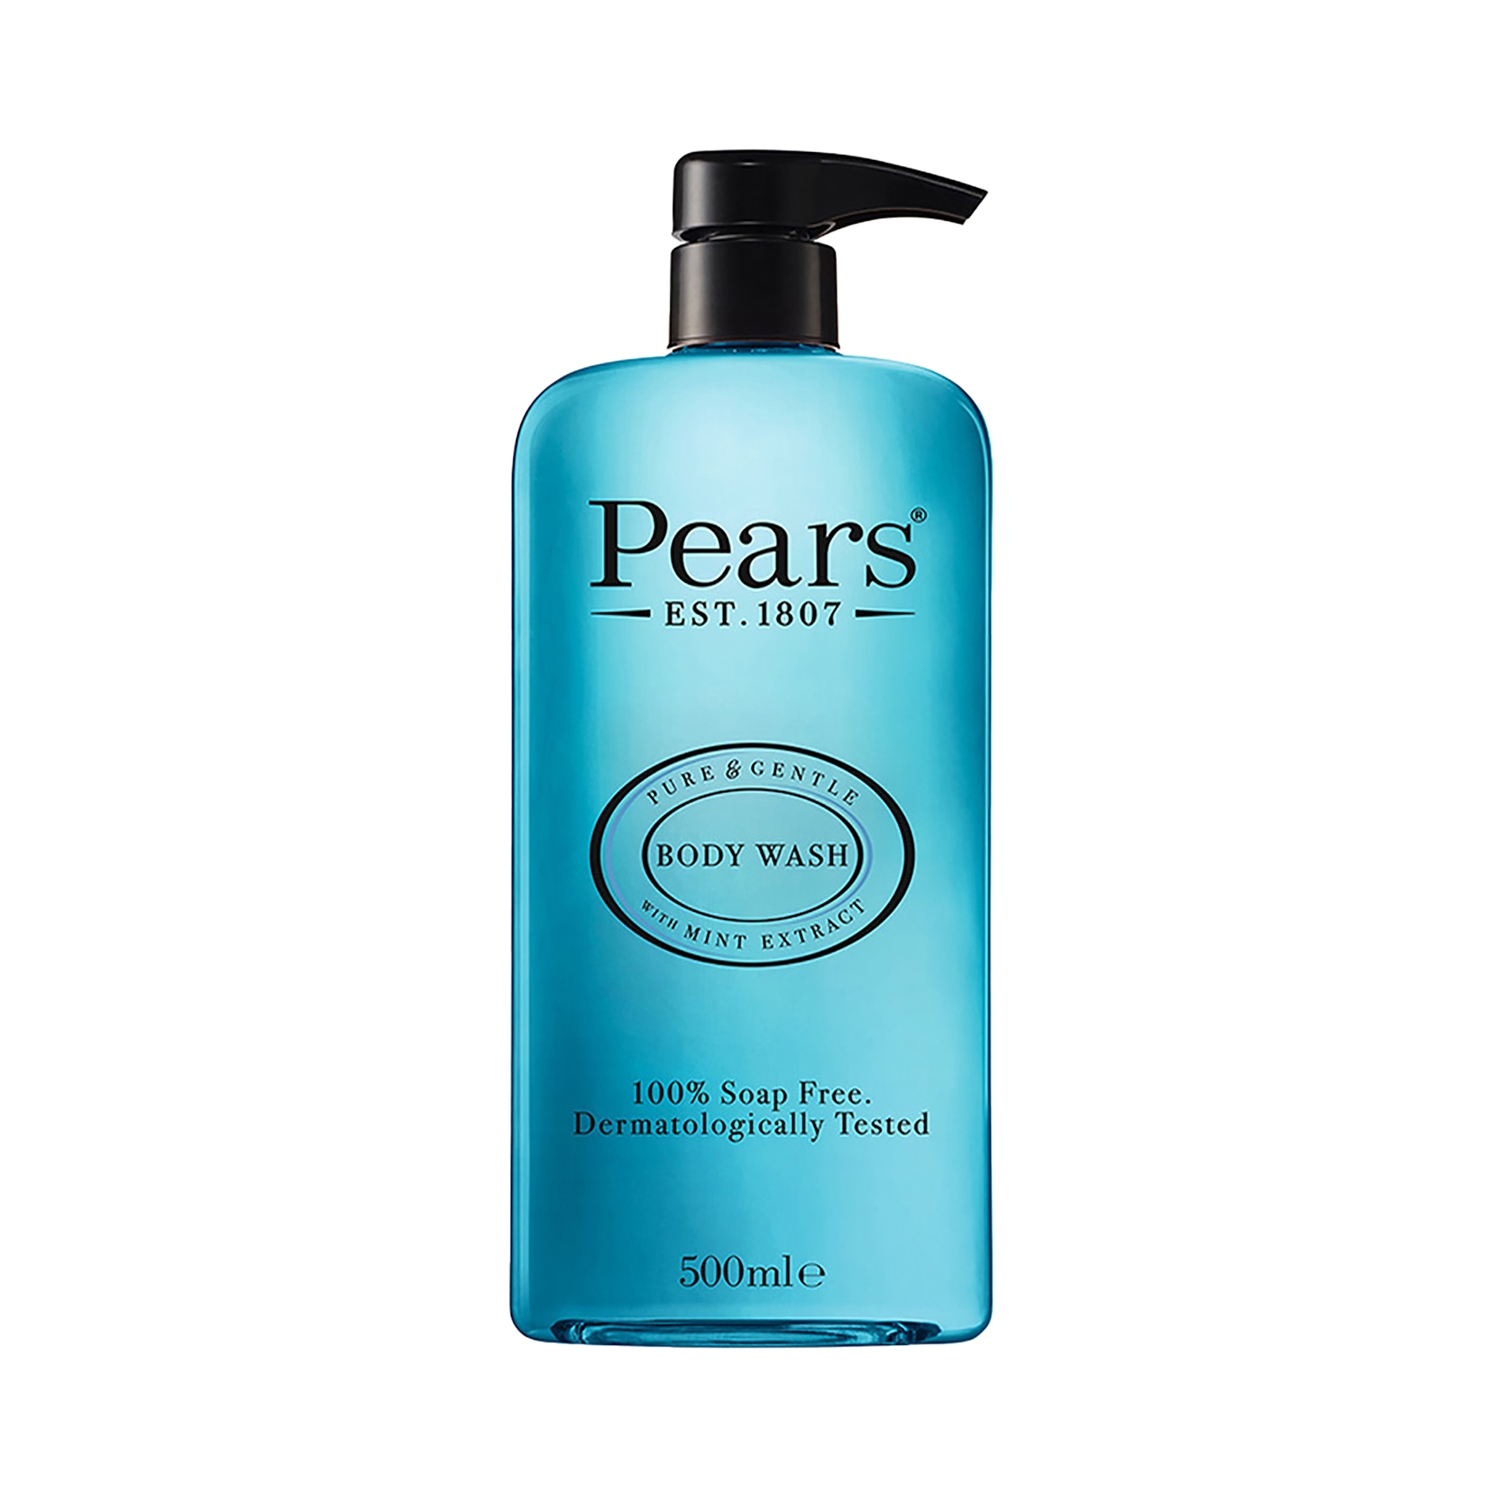 Pears Pure & Gentle Mint Extracts Body Wash (500ml)